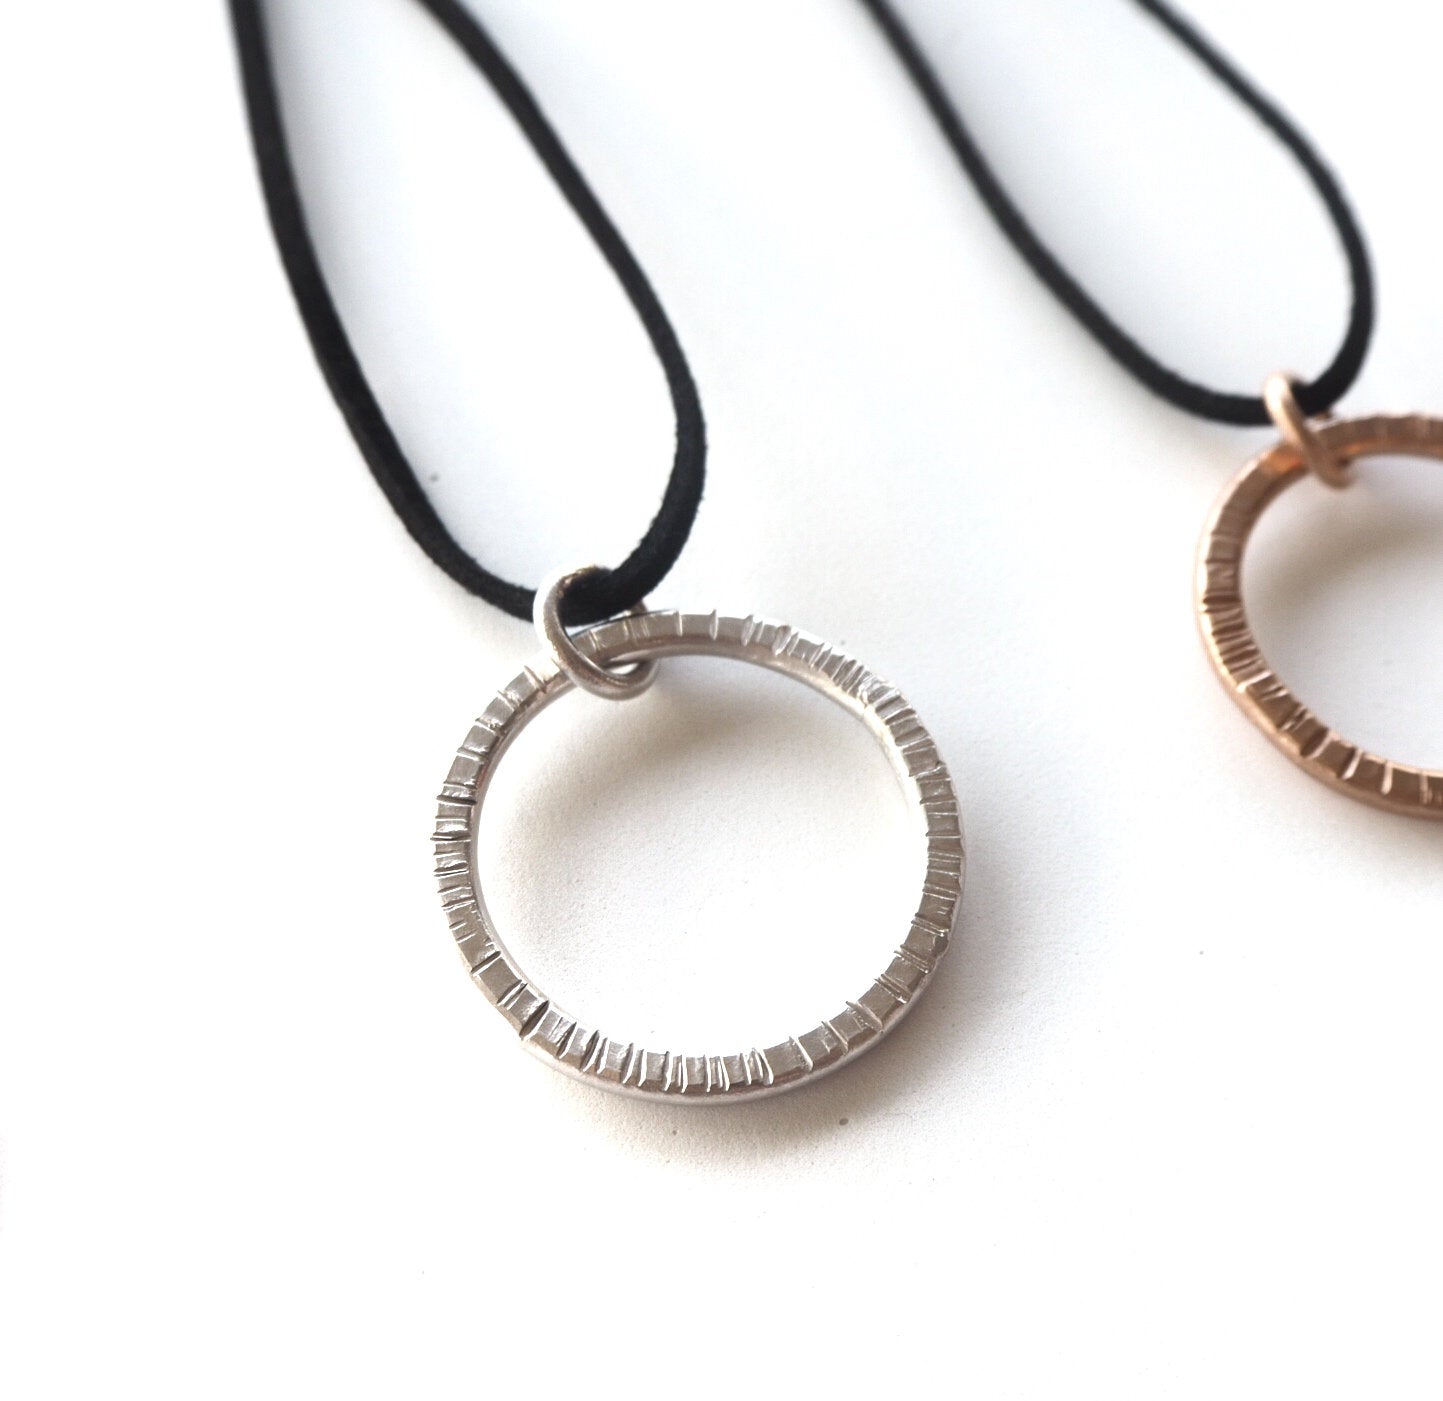 Textures collection - handmade hammered pendant necklace - "Straw" texture